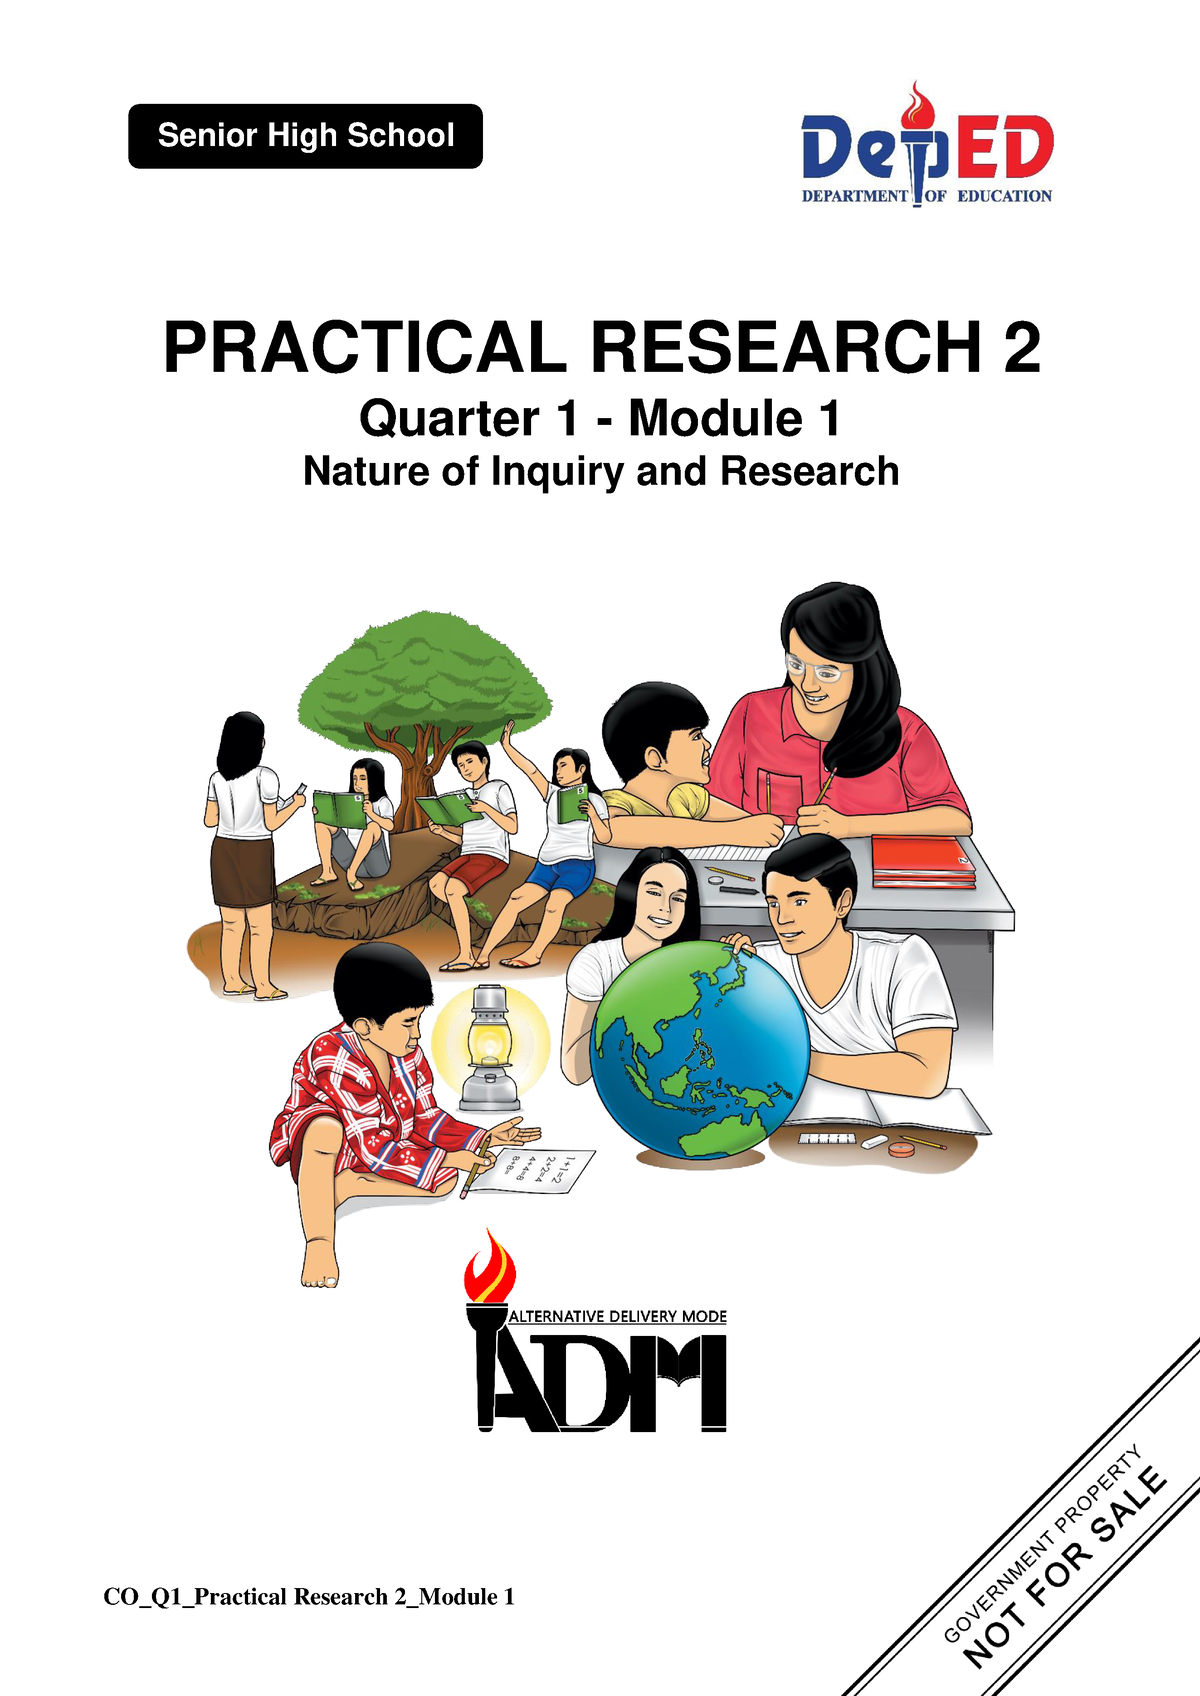 reflection about practical research 2 module 1 brainly